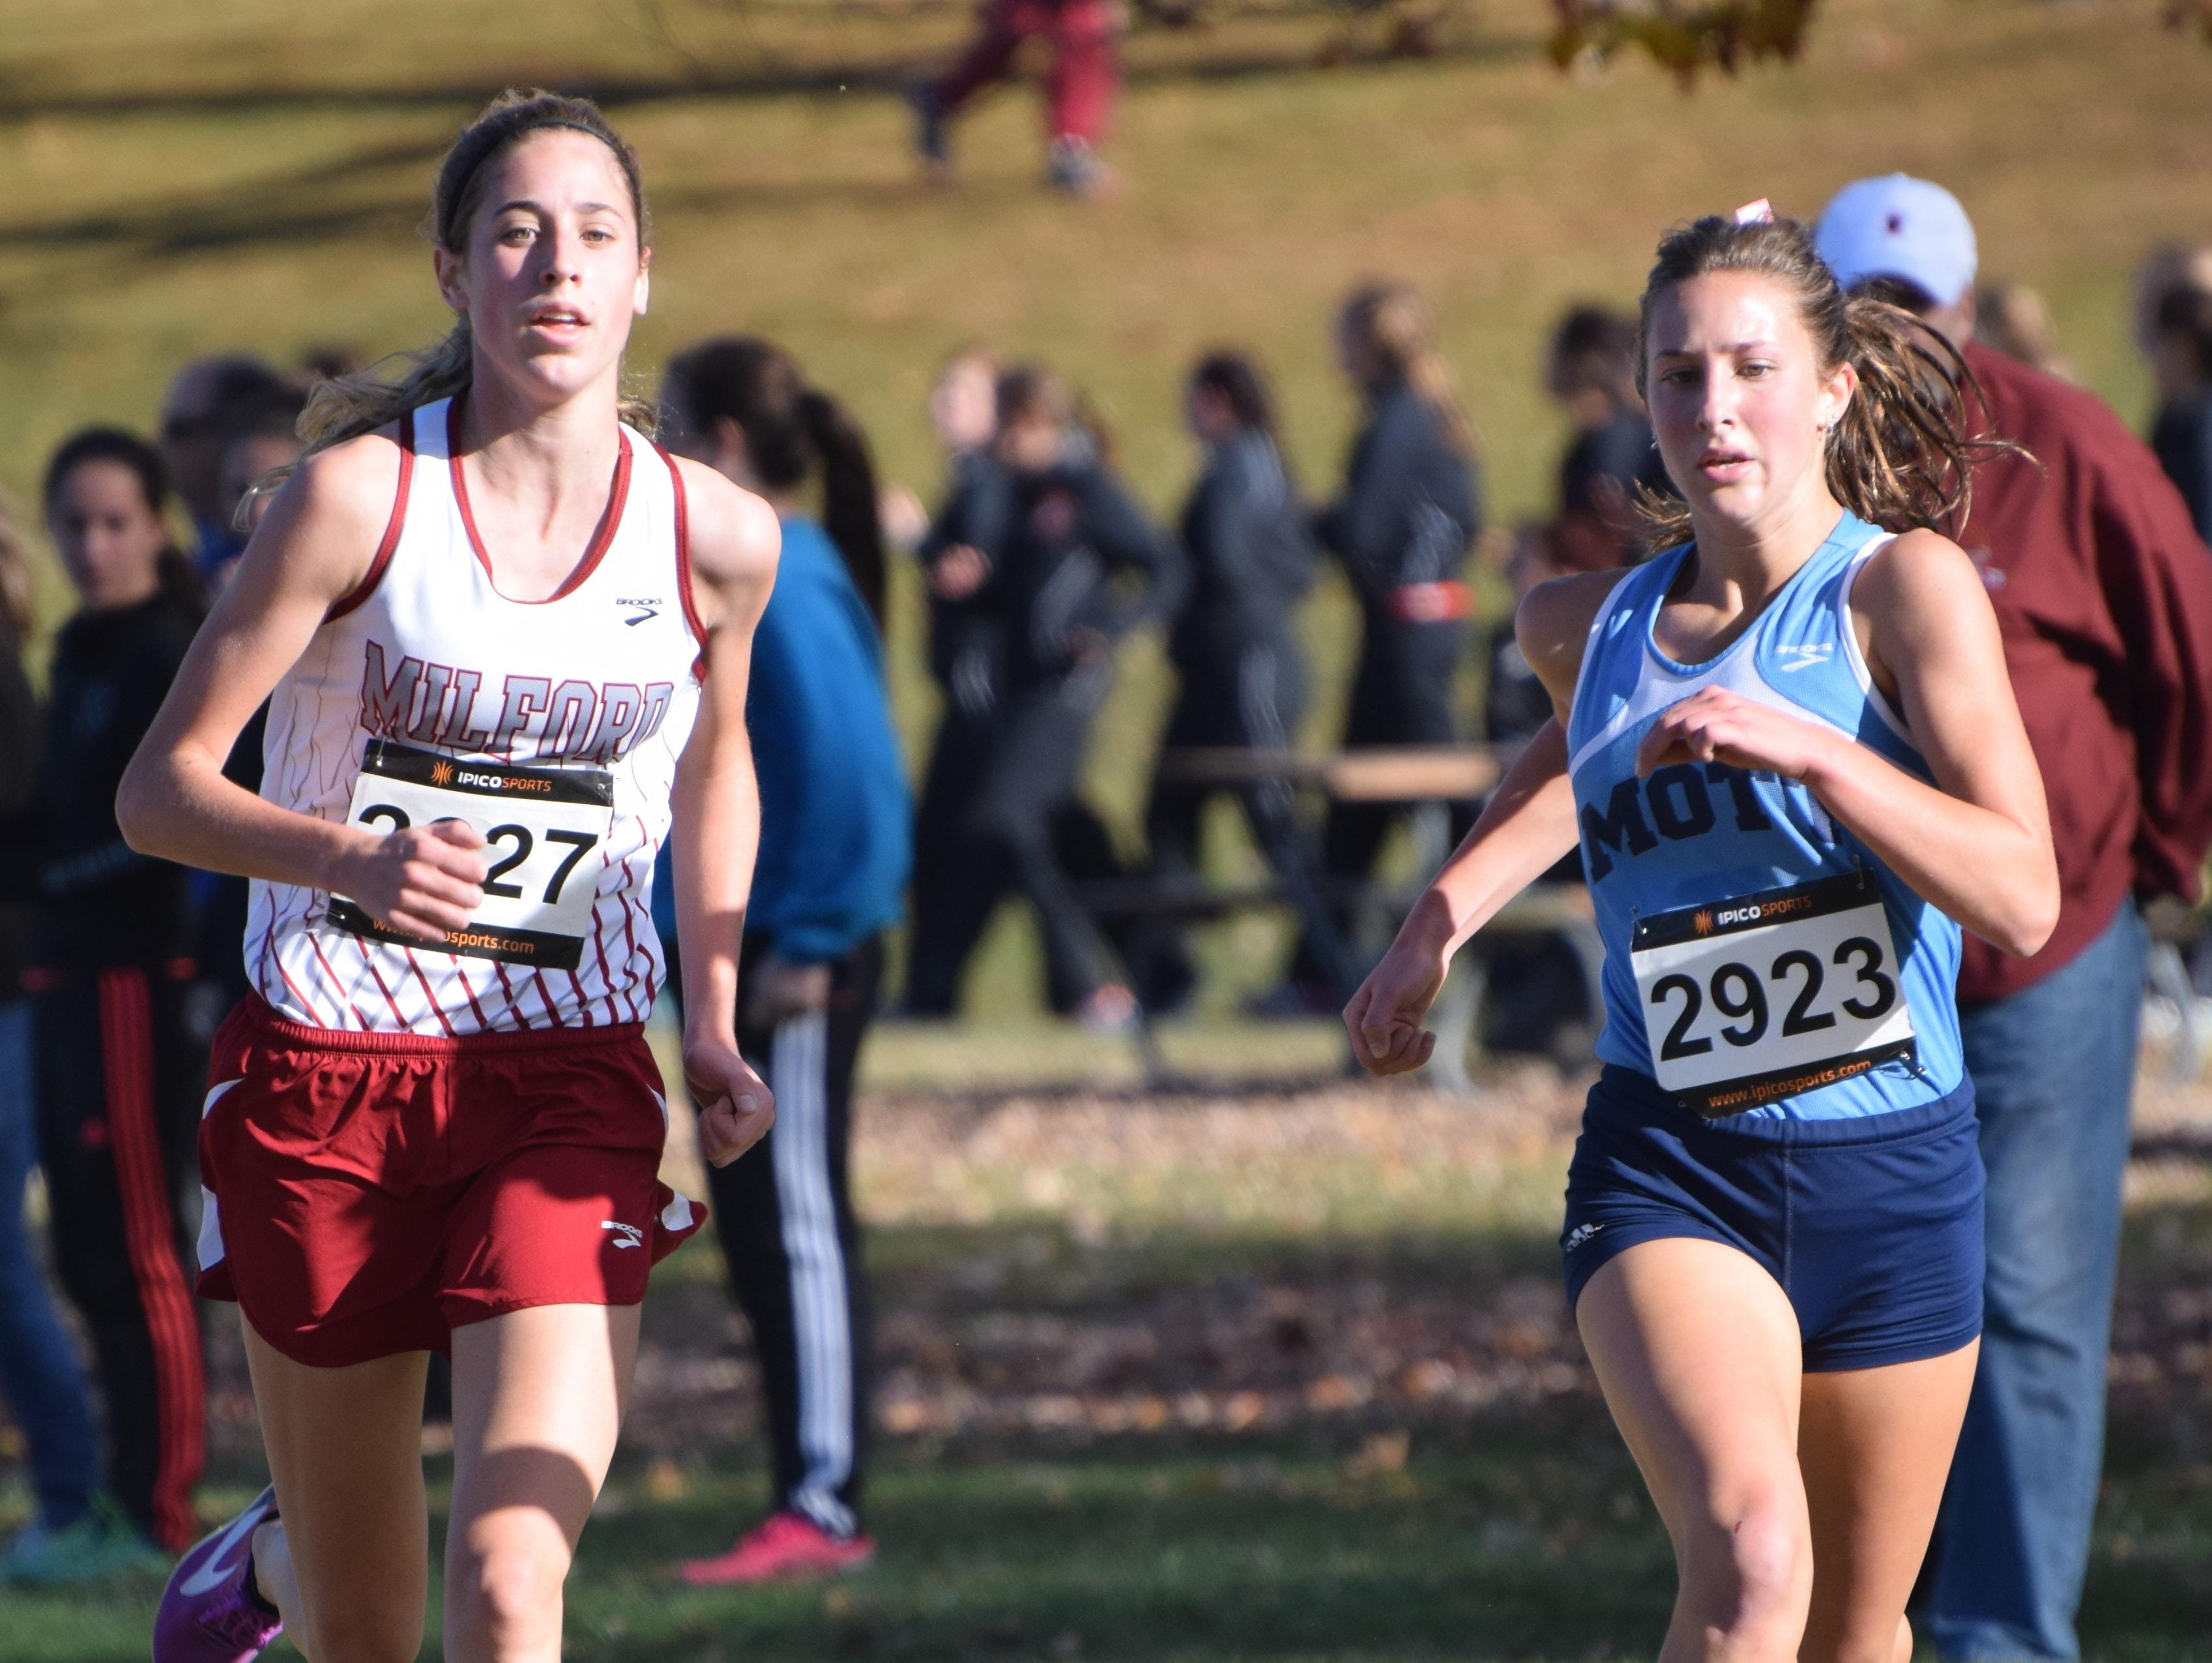 Milford’s Mallory Barrett (left) nipped Waterford Mott’s Katie Osika at the finish line for first place.